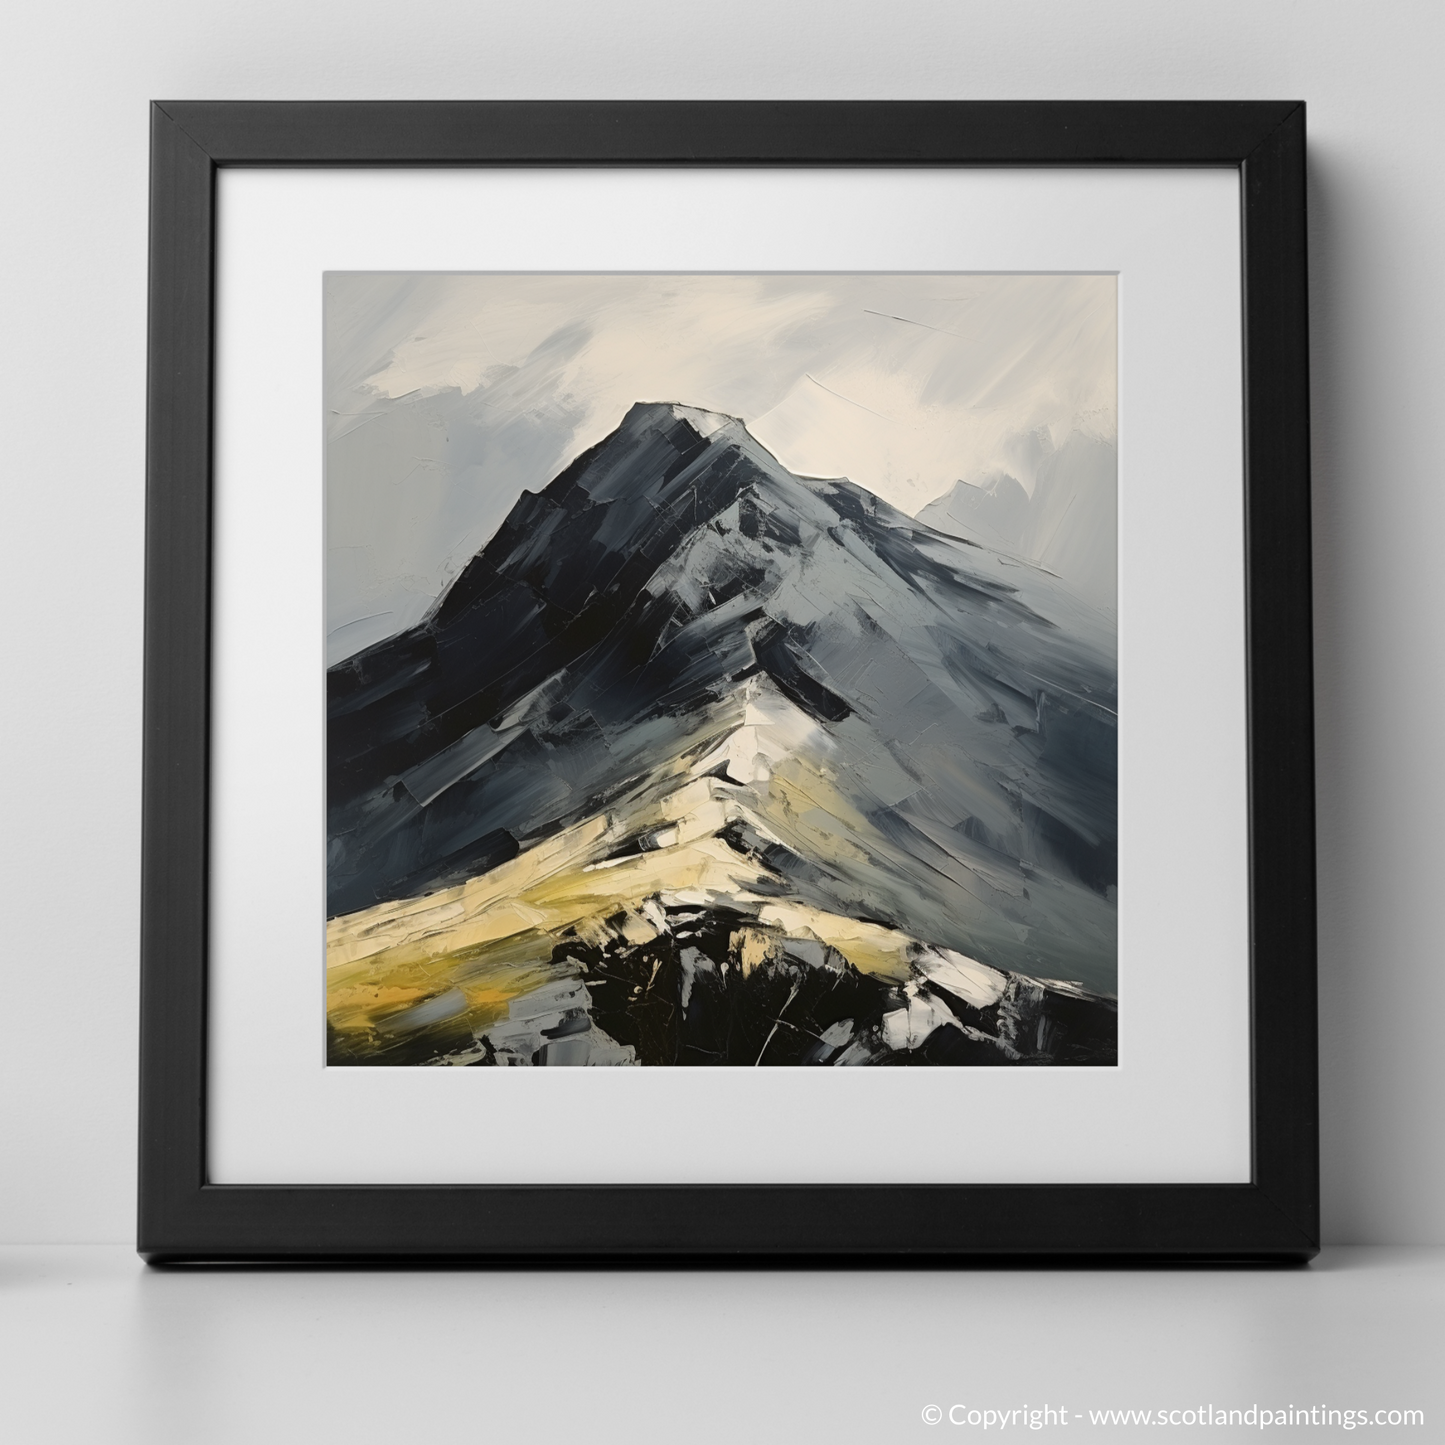 Painting and Art Print of Beinn Ìme. Beinn Ìme: An Expressionist Ode to the Scottish Highlands.